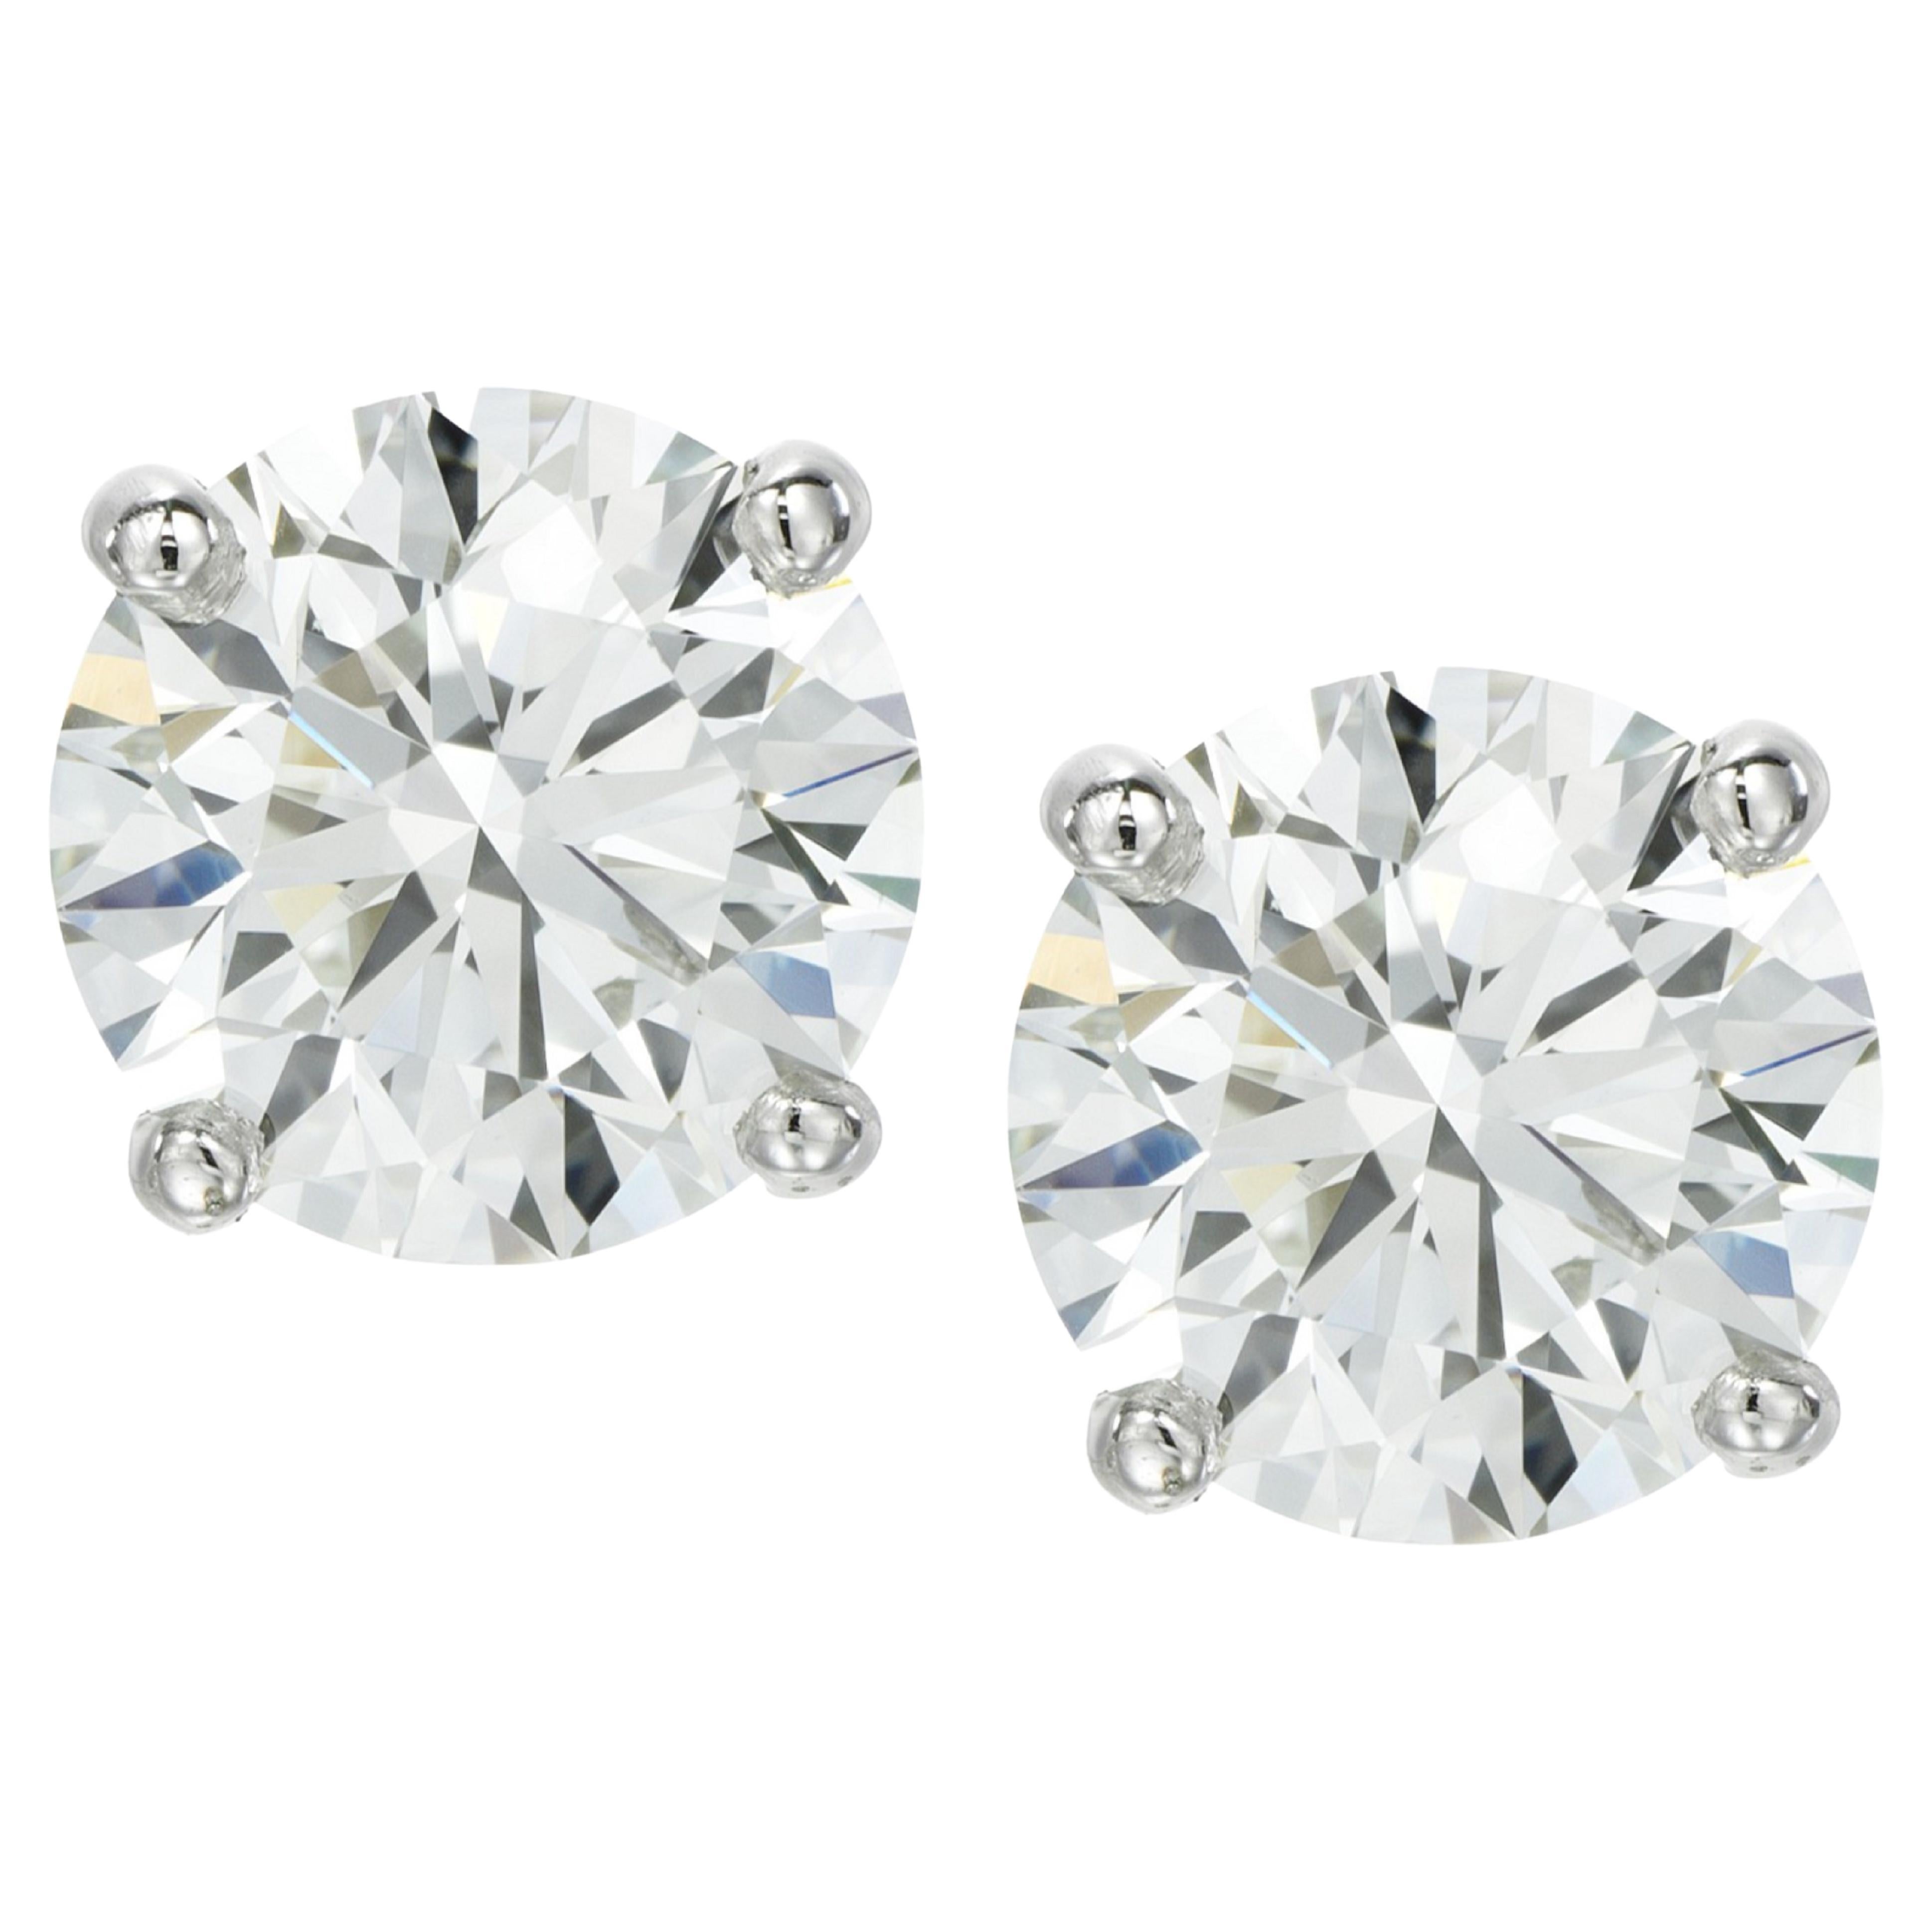 Exceptional GIA Certified 10 Carat Round Brilliant Cut Diamond Studs For Sale